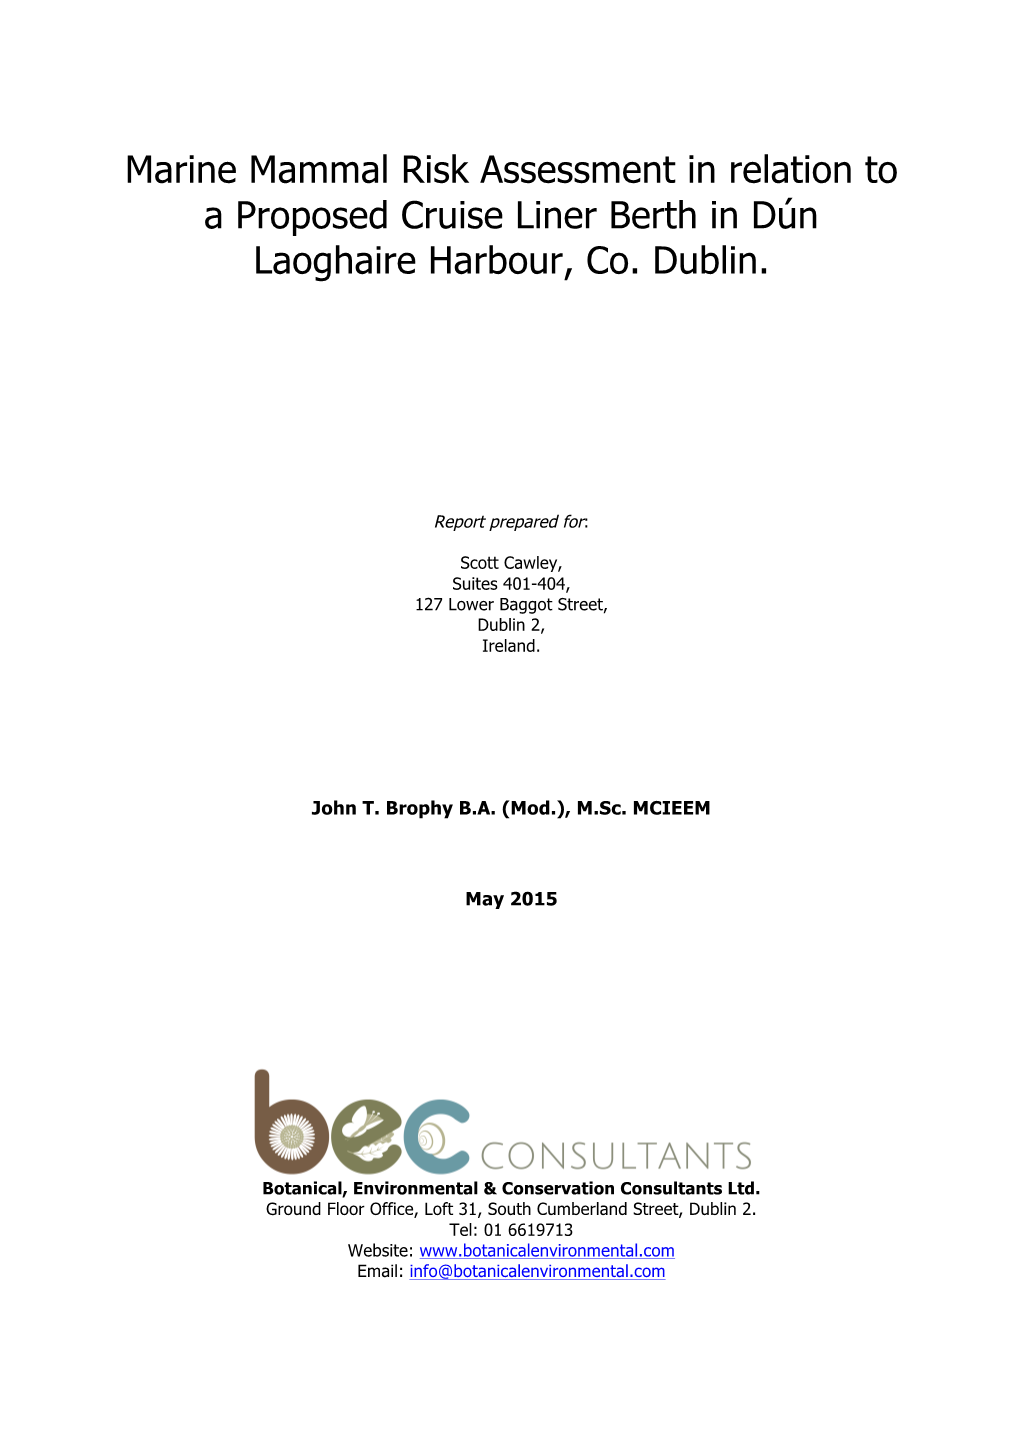 Marine Mammal Risk Assessment in Relation to a Proposed Cruise Liner Berth in Dún Laoghaire Harbour, Co